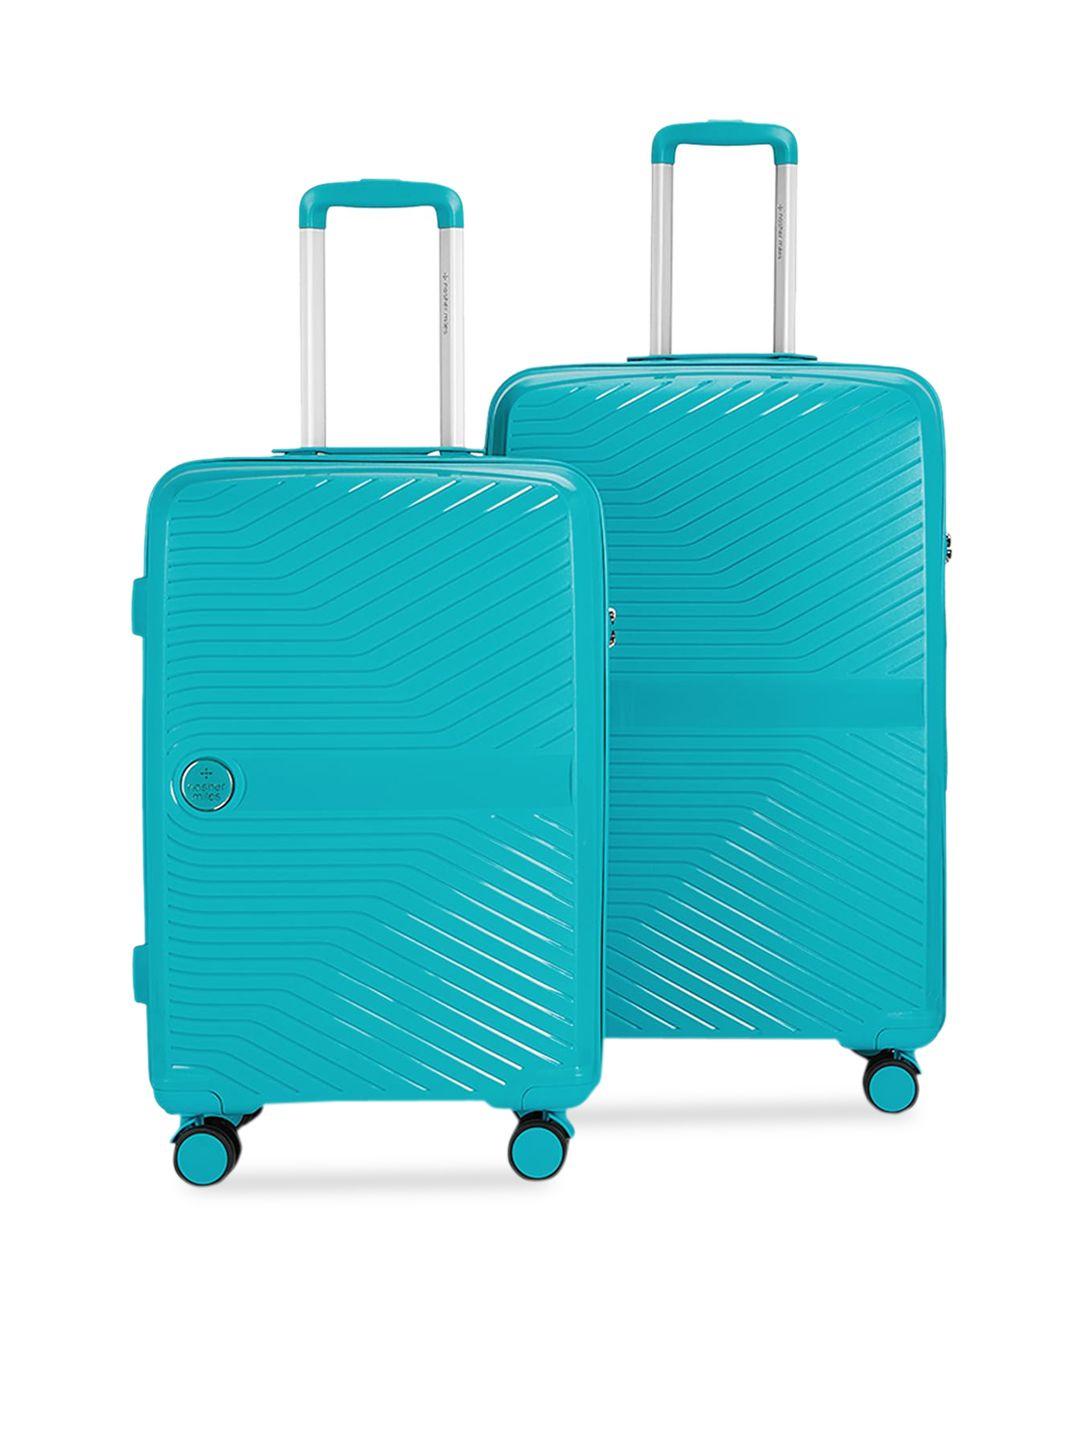 nasher miles set of 2 teal blue textured hard-sided trolley bags